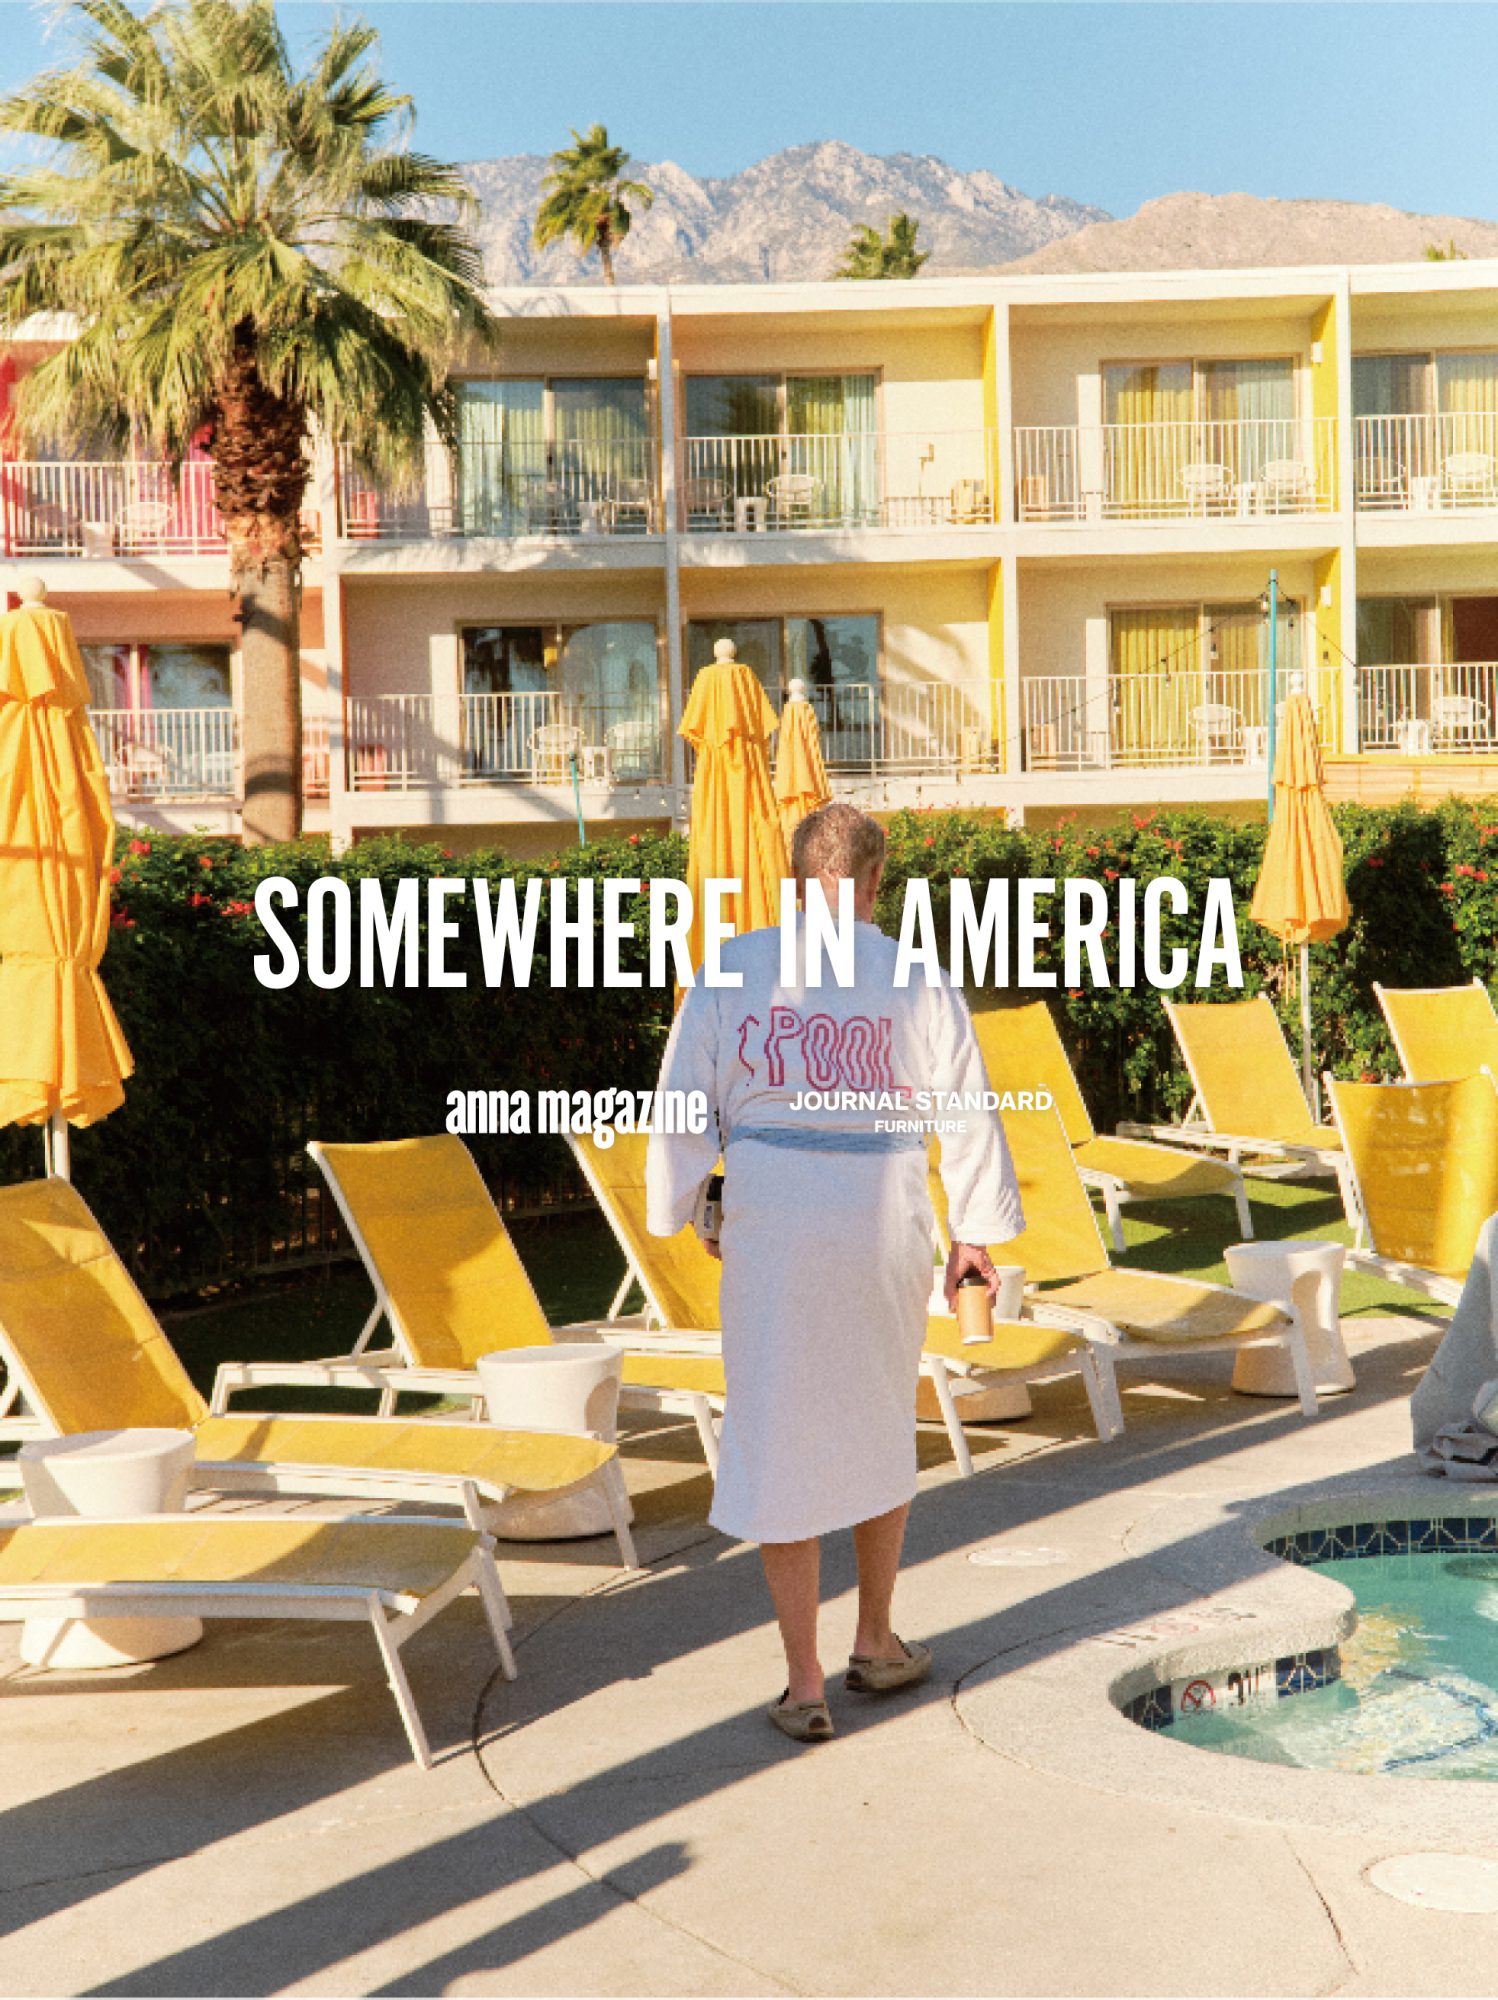 “SOMEWHERE IN AMERICA” PROJECT